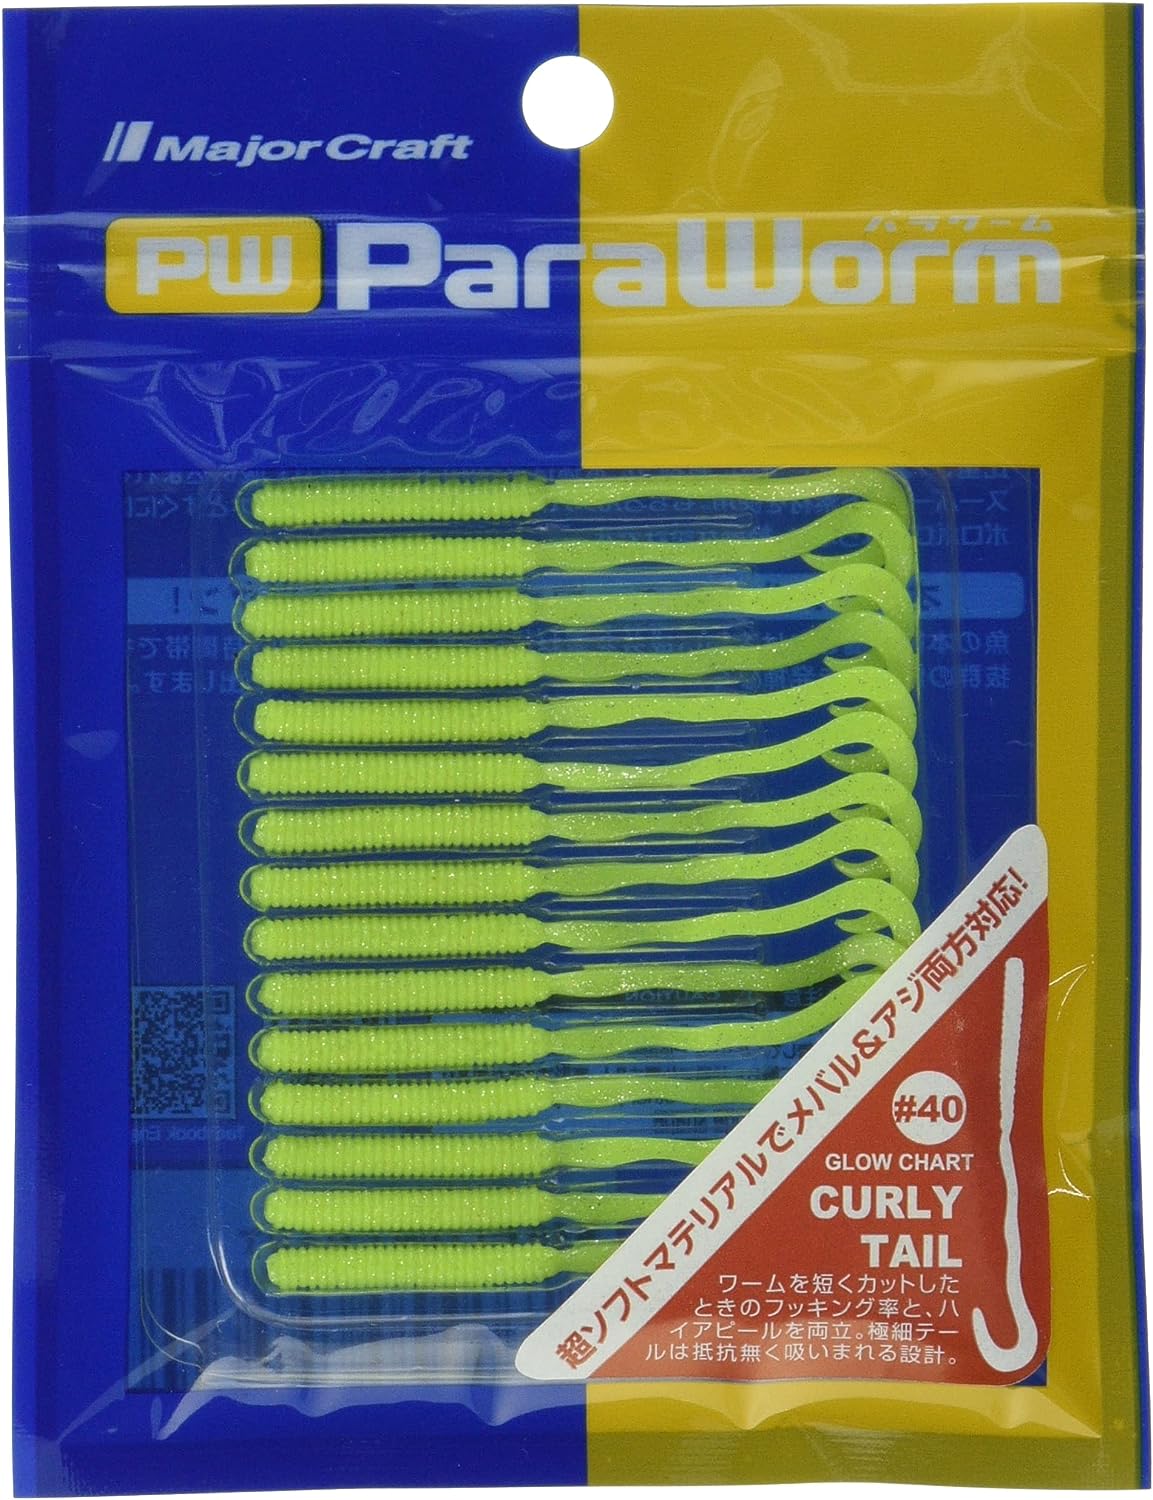 Major Craft Paraworm Curly Tail Lures